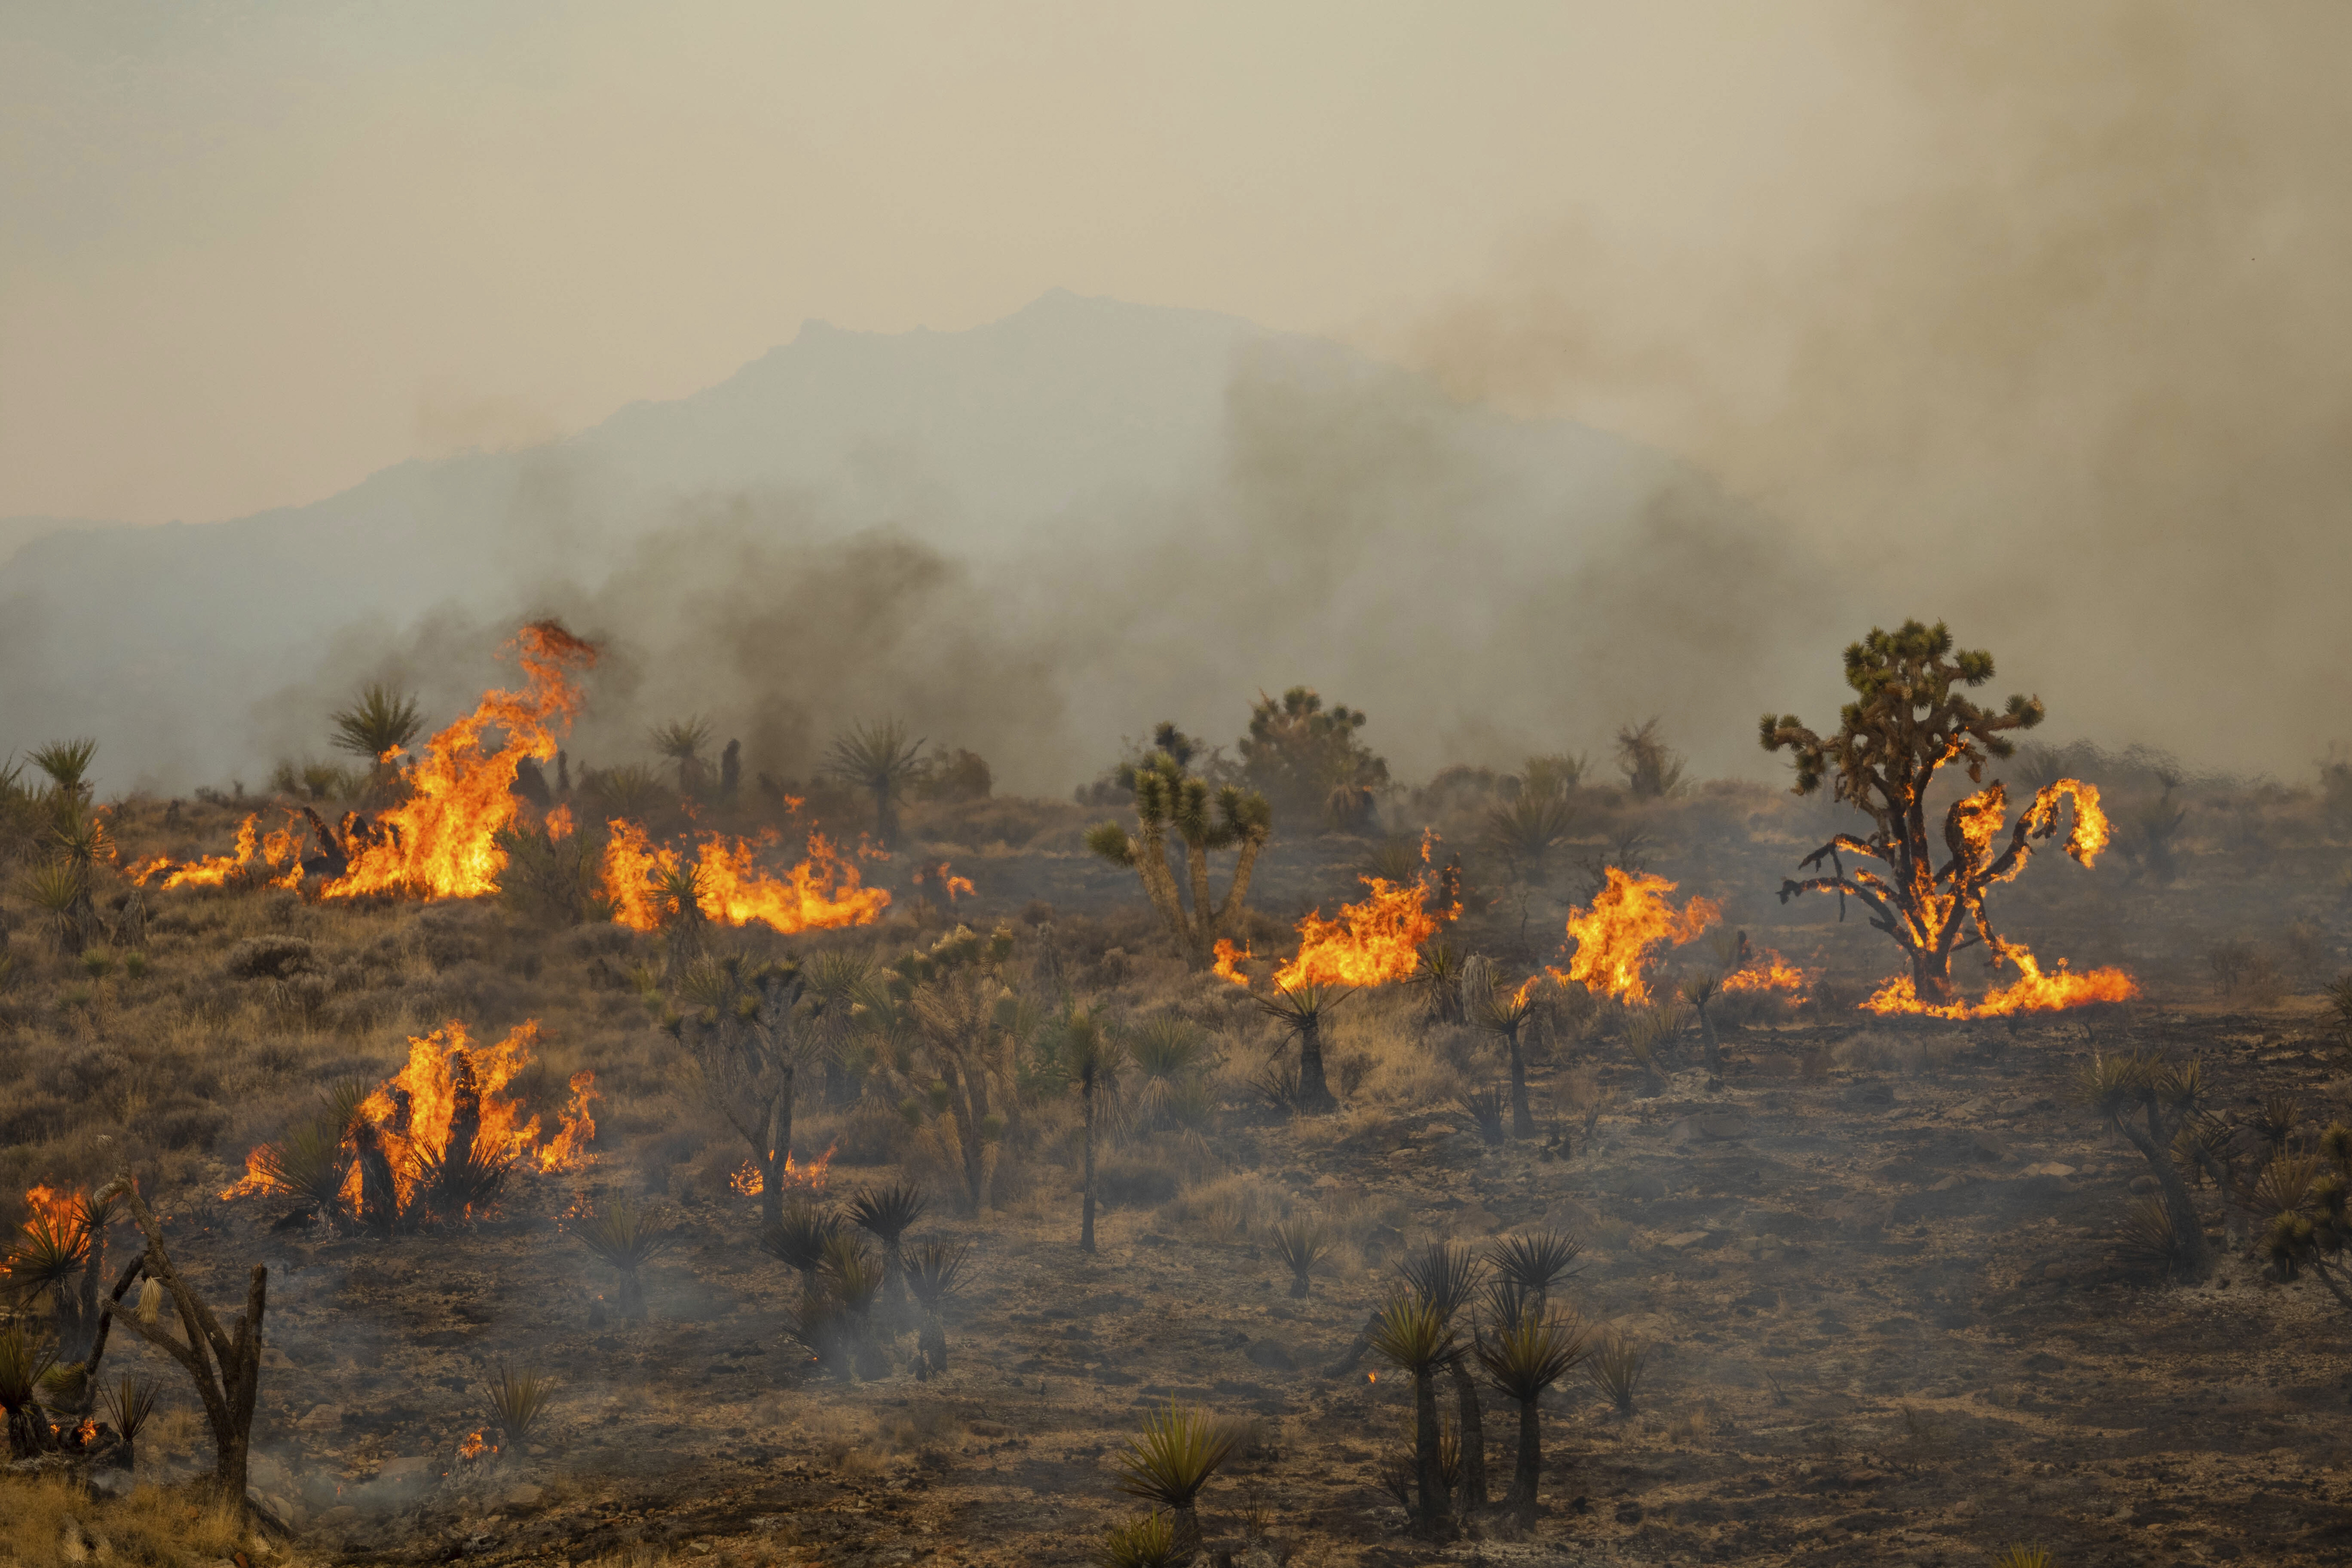 Joshia Trees burn in the York Fire, Sunday, July 30, 2023, in the Mojave National Preserve, Calif. The York Fire has burned over 77,000 acres and has 0% containment. (AP Photo/Ty ONeil)